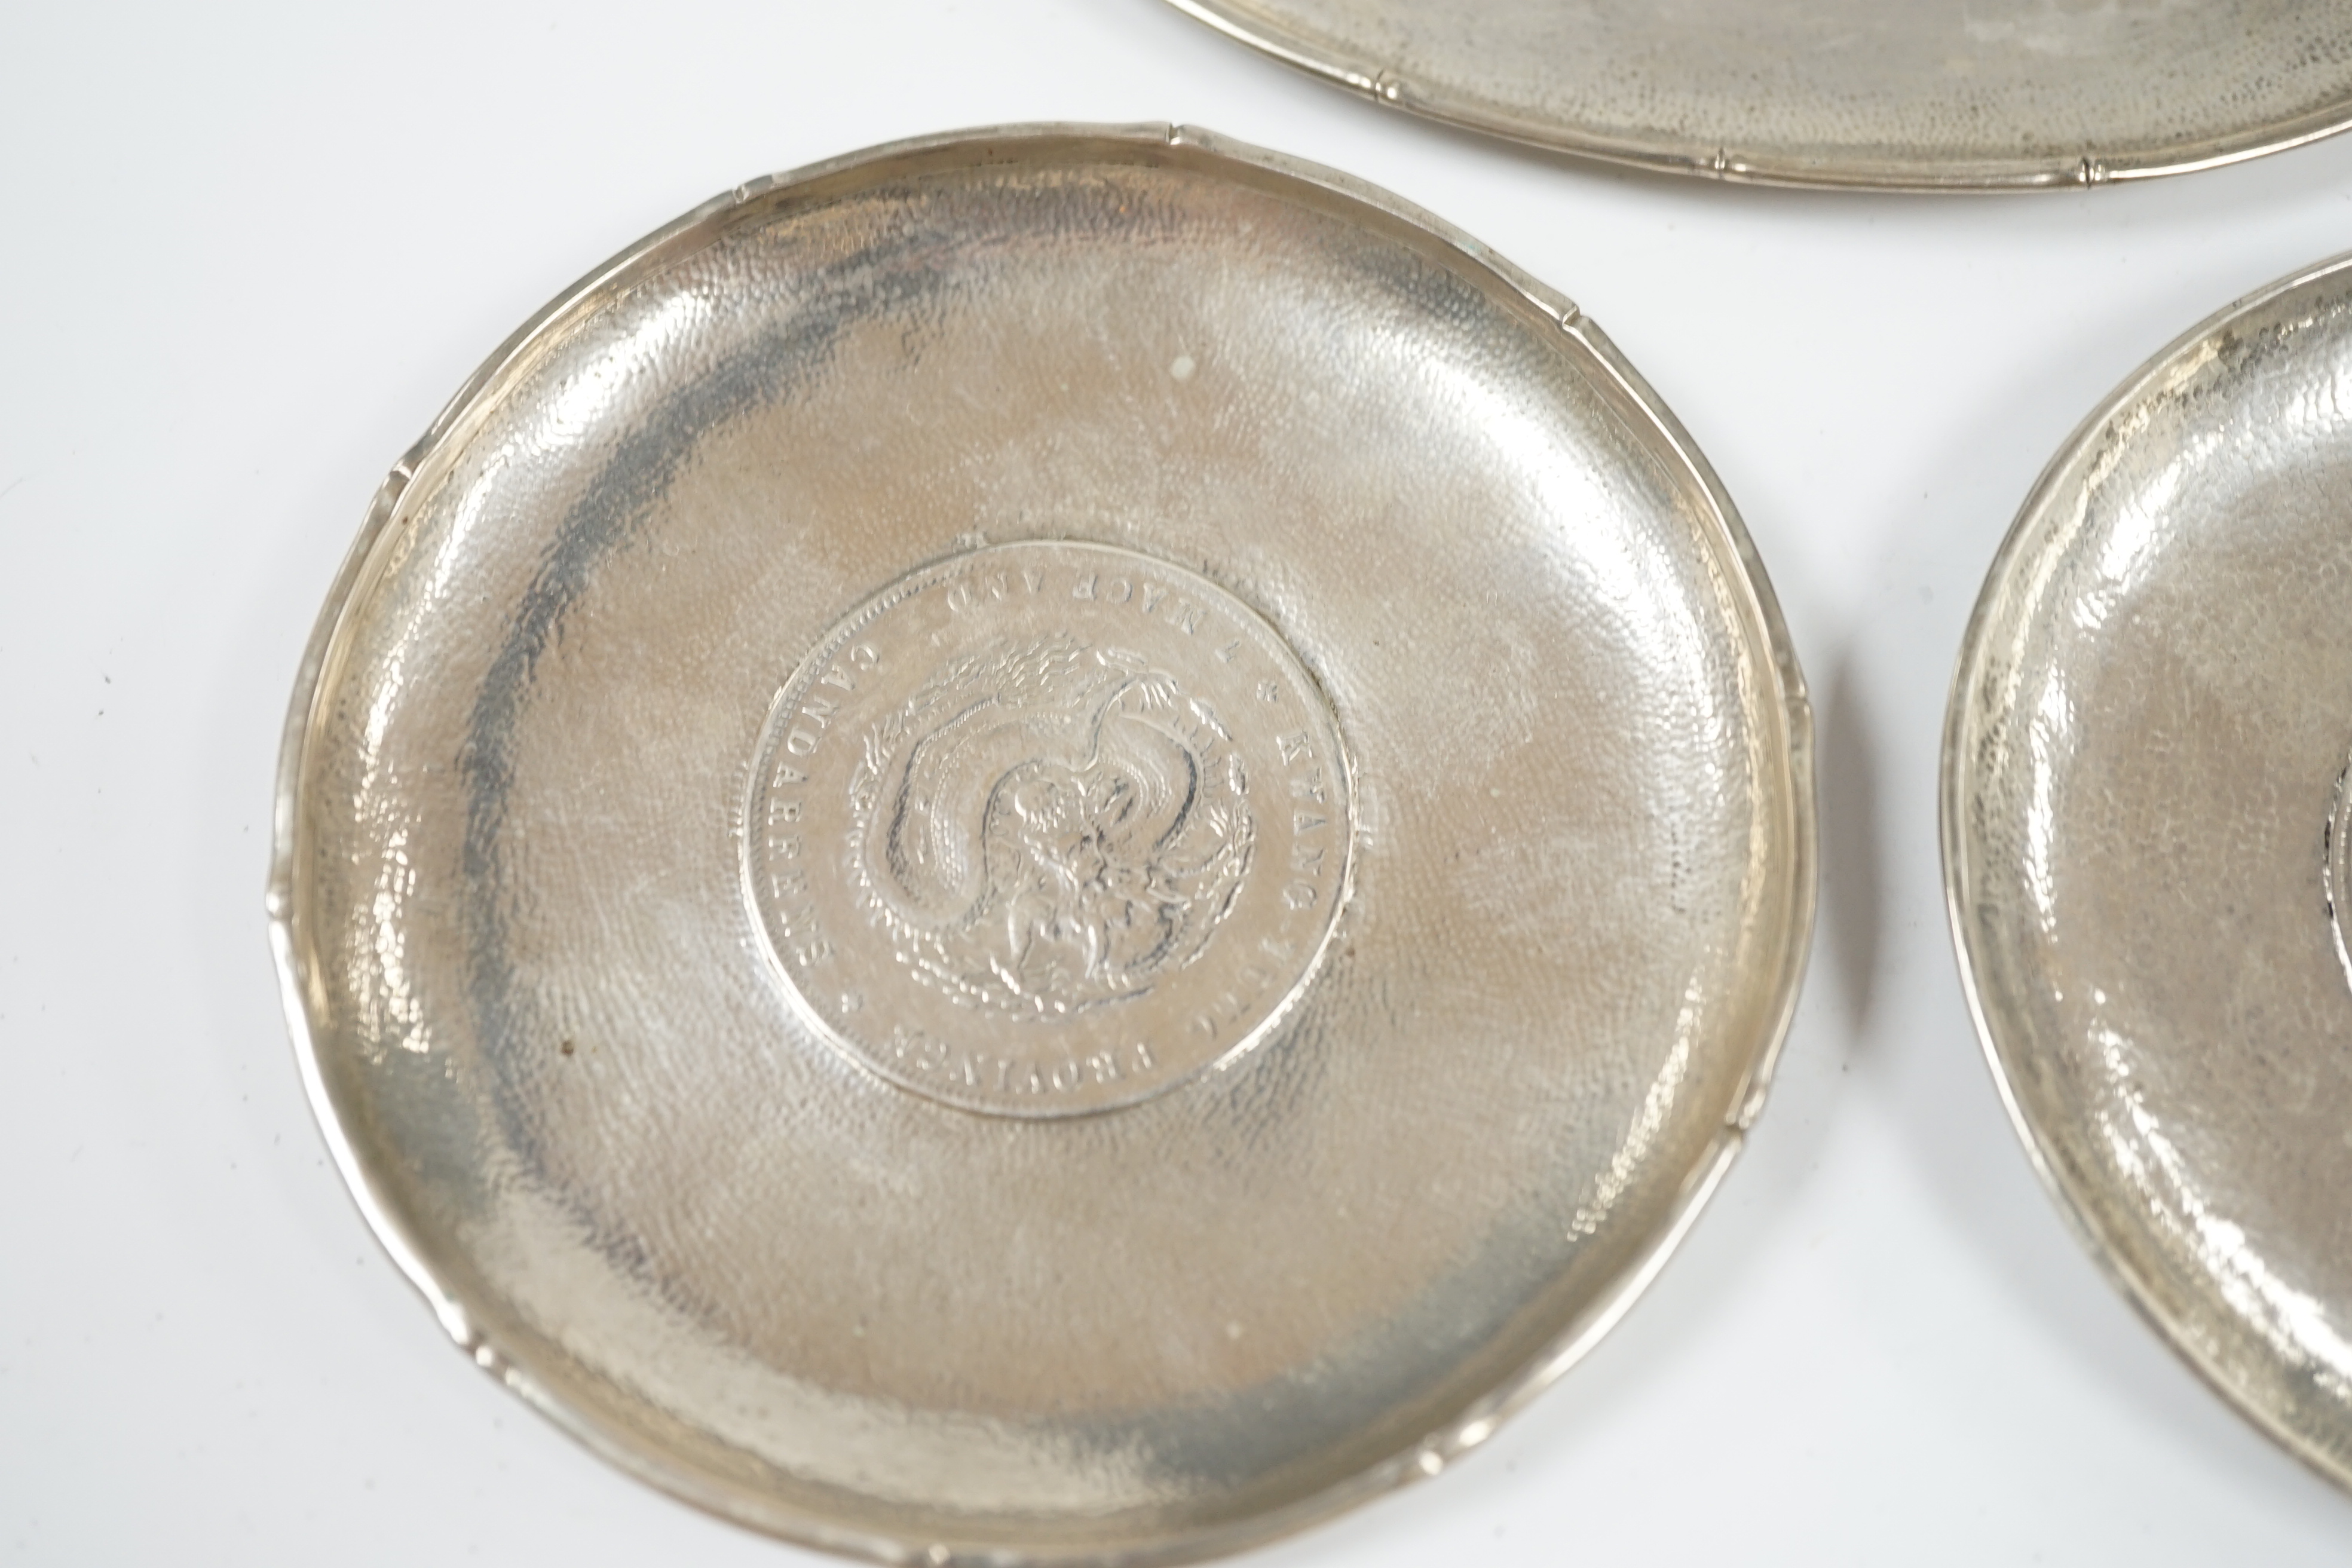 Three assorted small Chinese white metal dish, each inset with a coin, largest 11.8cm. Condition - fair